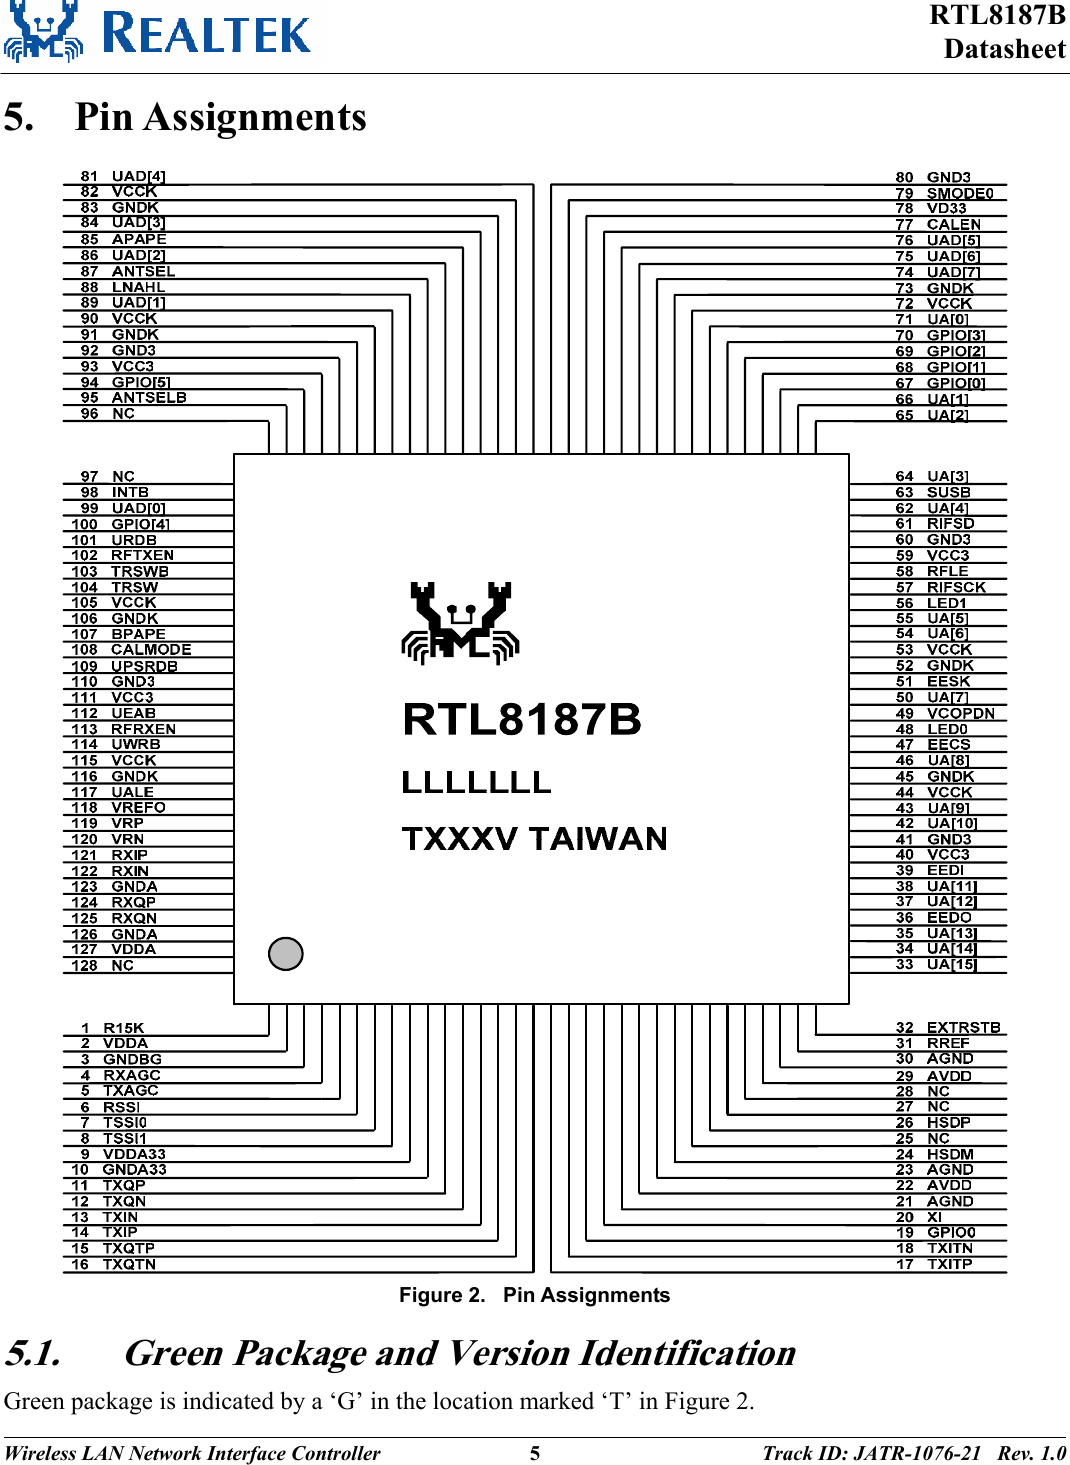 RTL8187B Datasheet Wireless LAN Network Interface Controller  5 Track ID: JATR-1076-21   Rev. 1.0  5. Pin Assignments  Figure 2.   Pin Assignments 5.1. Green Package and Version Identification Green package is indicated by a ‘G’ in the location marked ‘T’ in Figure 2. 